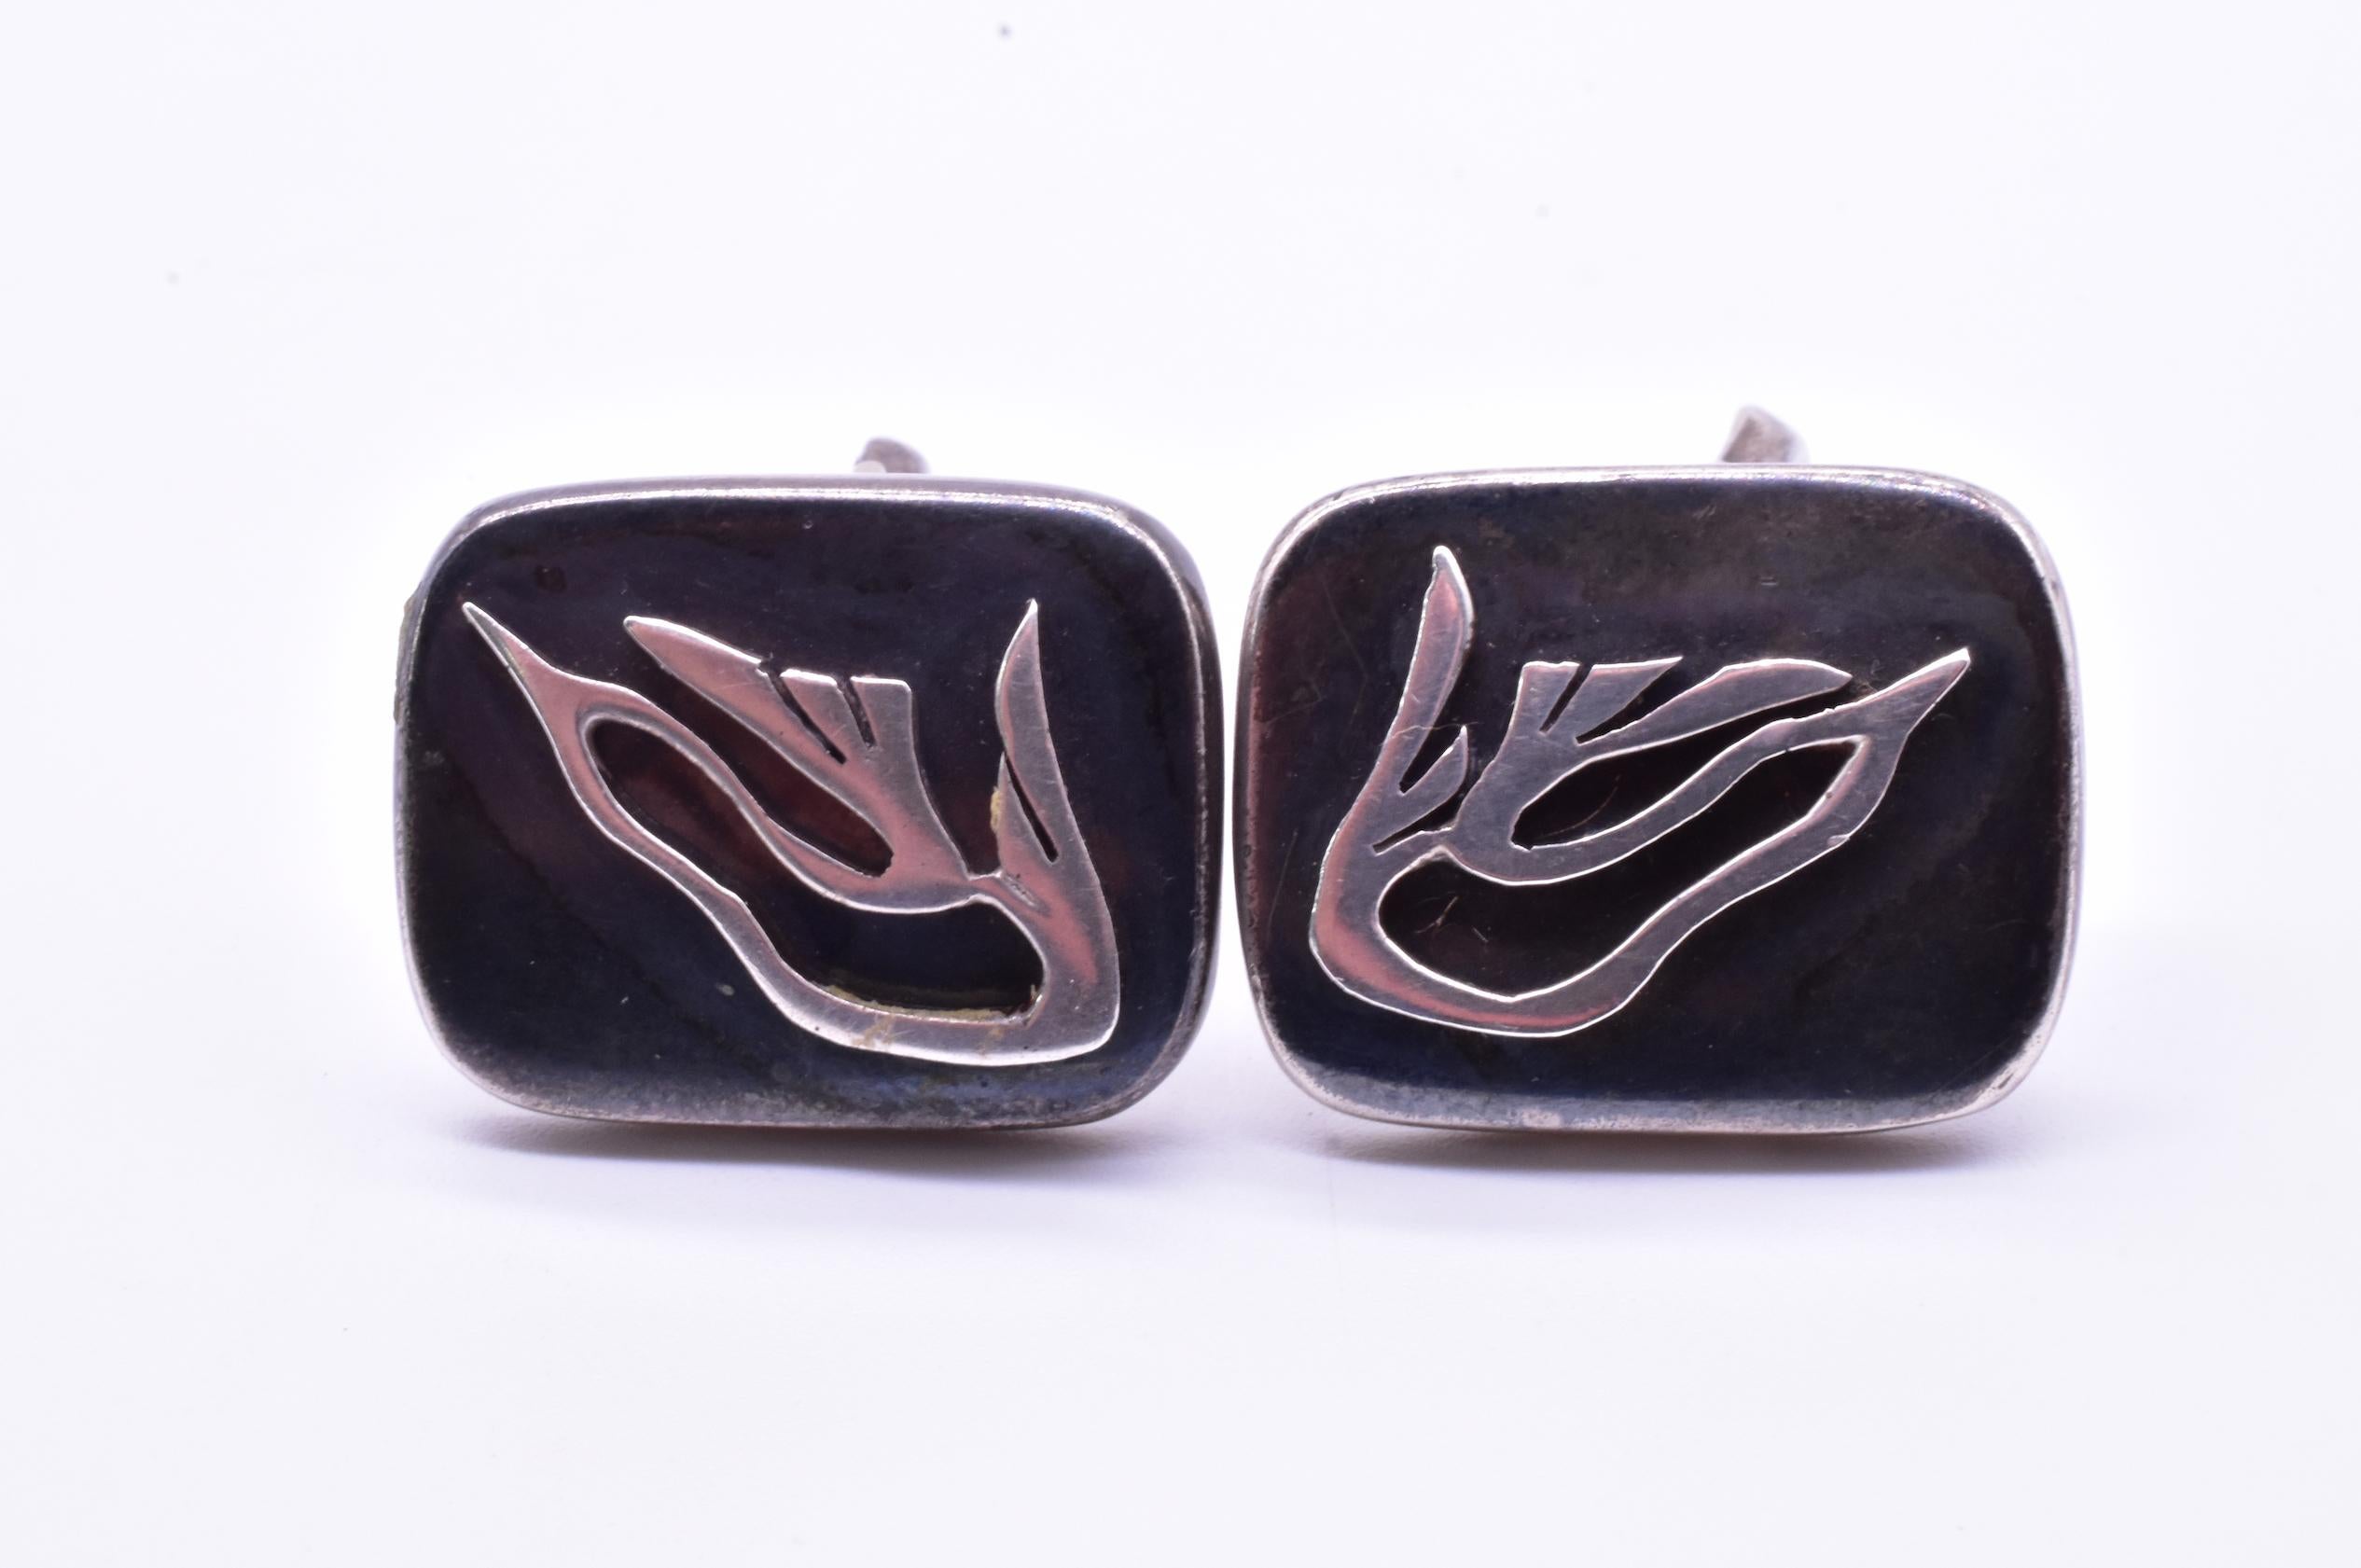 Enrique Ledesma was a silversmith who trained in the famous artist's colony in Taxco under William Spratling, the well known jewelry designer in the early 20th century. He opened his own workshop in 1950 and is known for his beautiful and blending